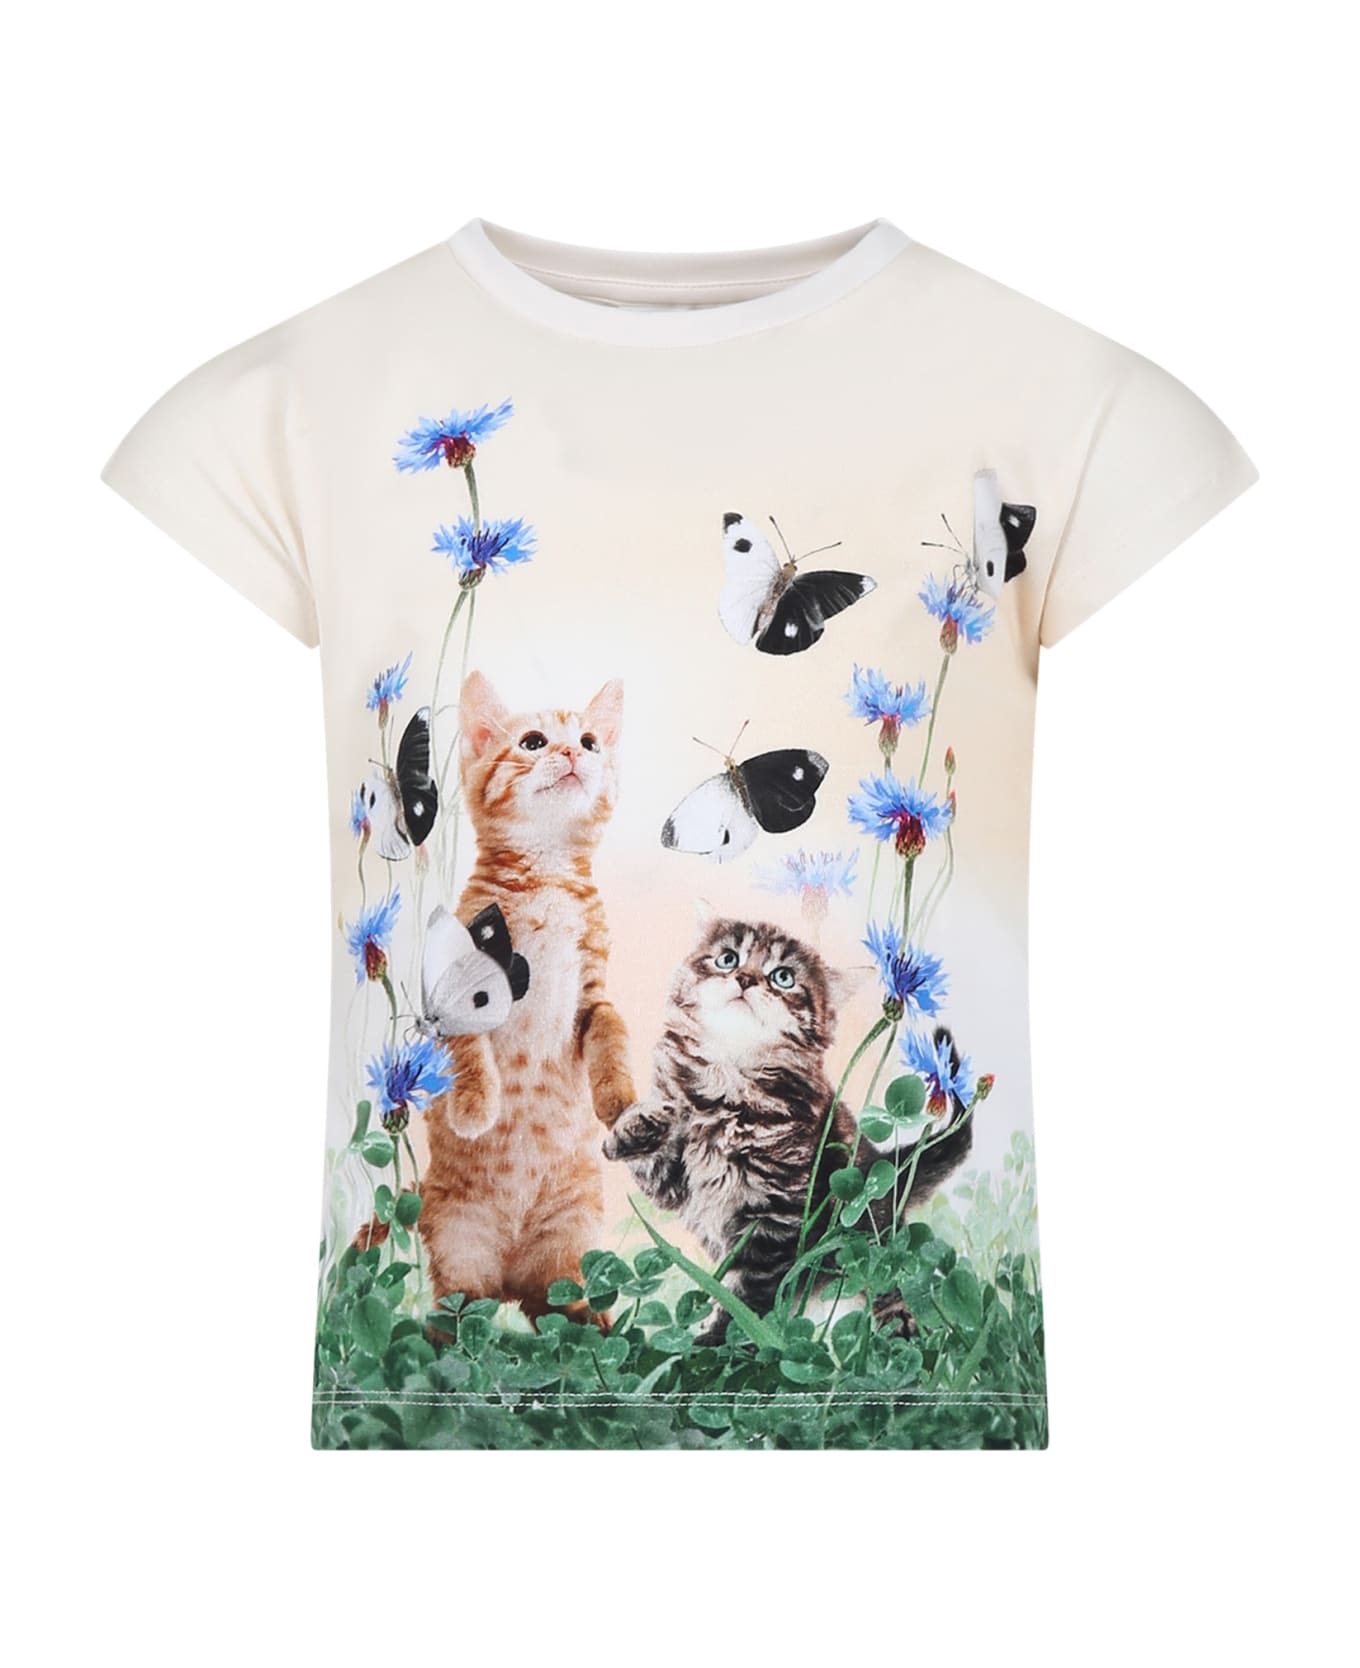 Molo Ivory T-shirt For Girl With Cats Print - Ivory Tシャツ＆ポロシャツ